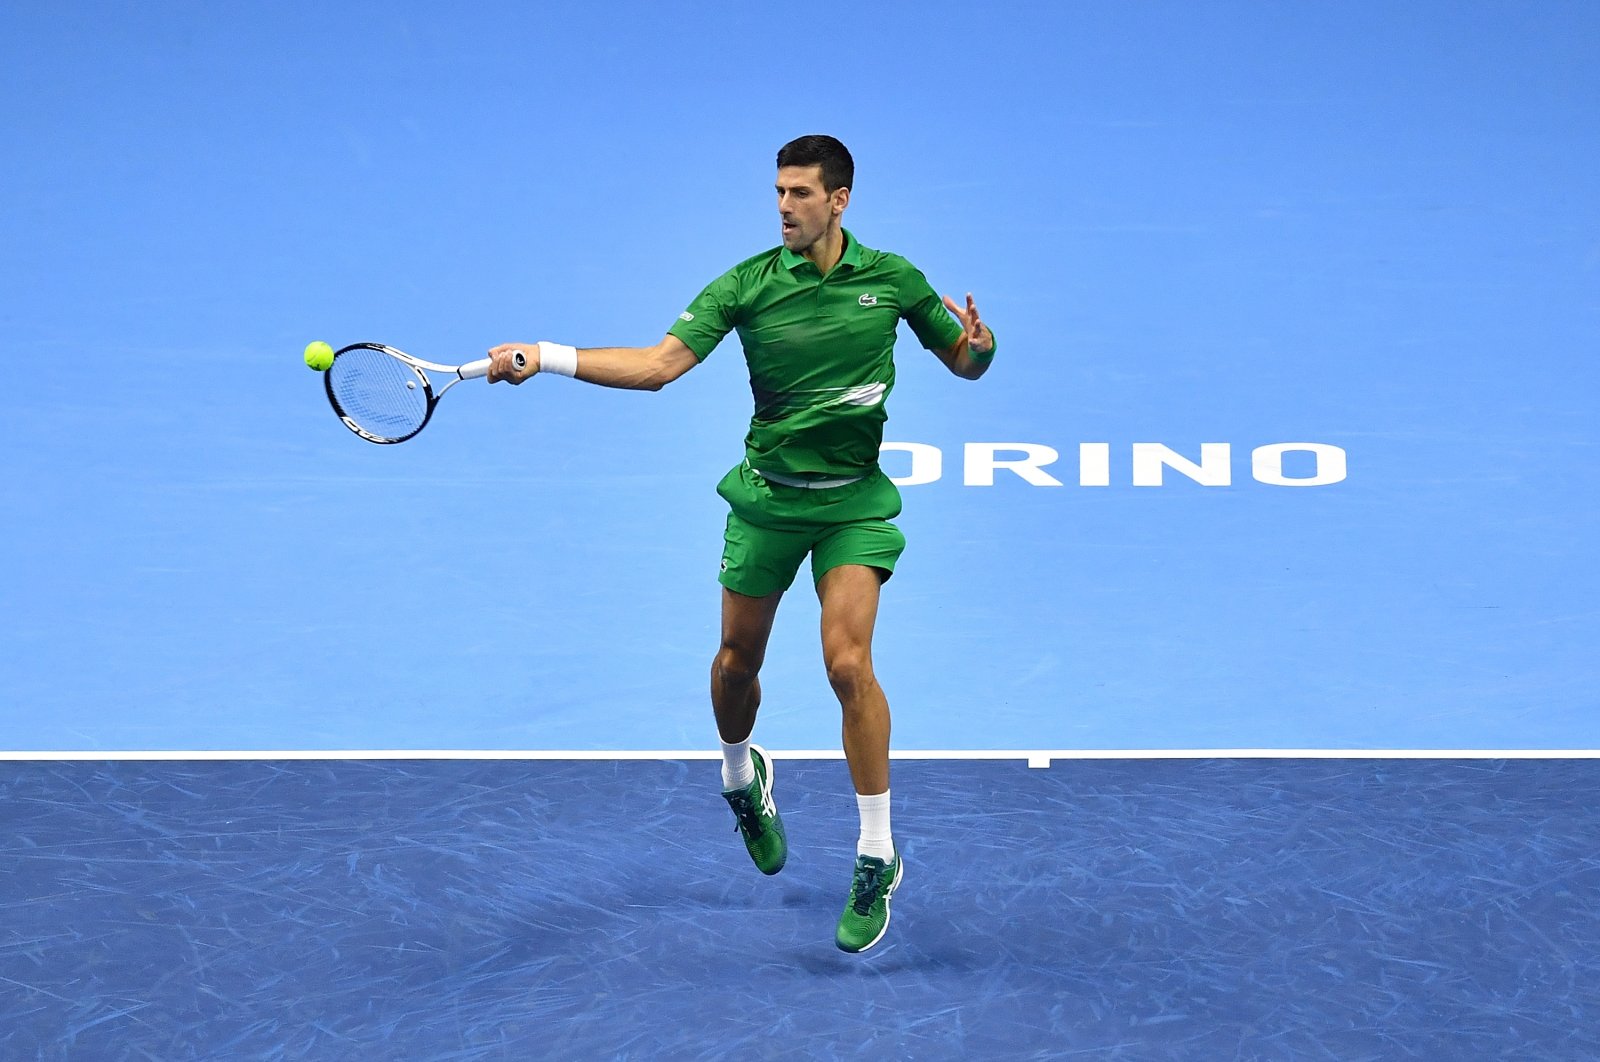 Novak Djokovic of Serbia plays a forehand shot during the round-robin match between Andrey Rublev of Russia during day four of the Nitto ATP Finals at Pala Alpitour, Turin, Italy, Nov. 16, 2022. (Getty Images Photo)